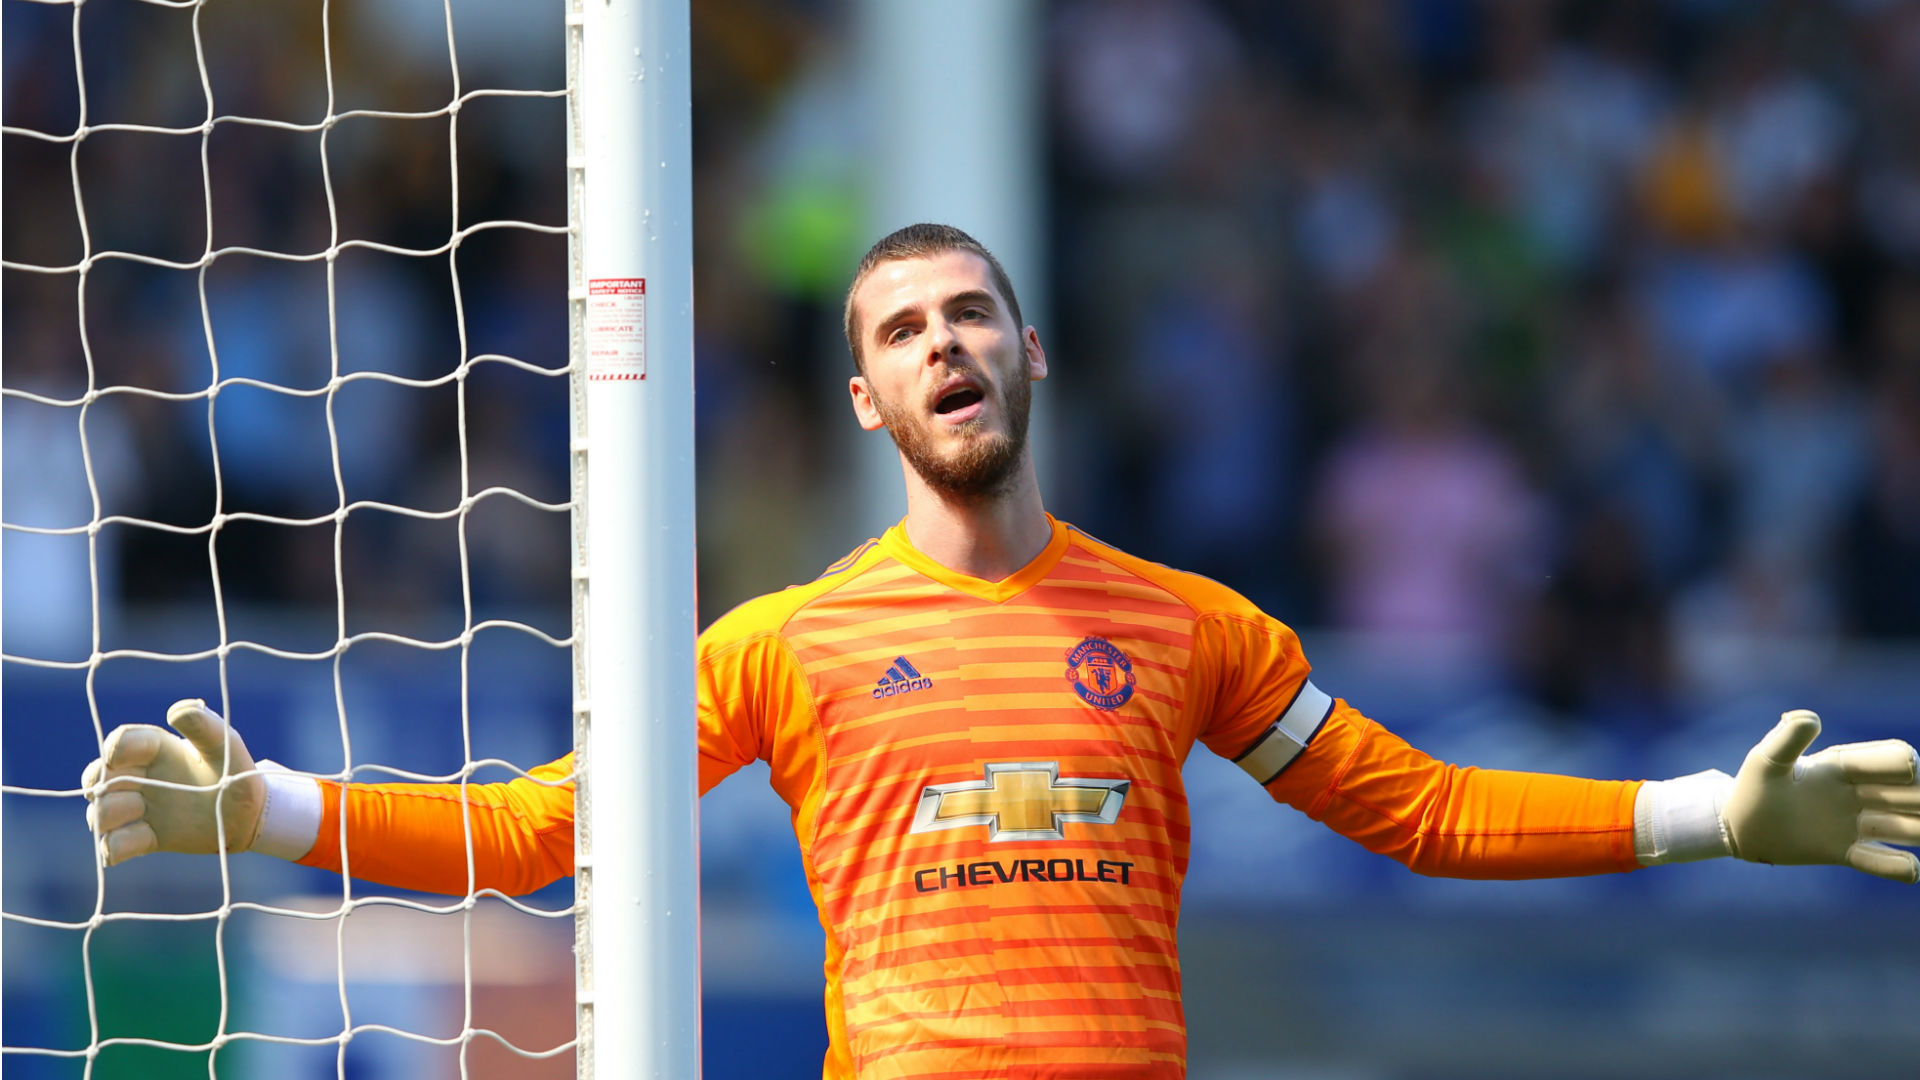 Manchester United were thrashed 4-0 by Everton on Sunday as Ole Gunnar Solskjaer's side slumped to a fifth straight away defeat.